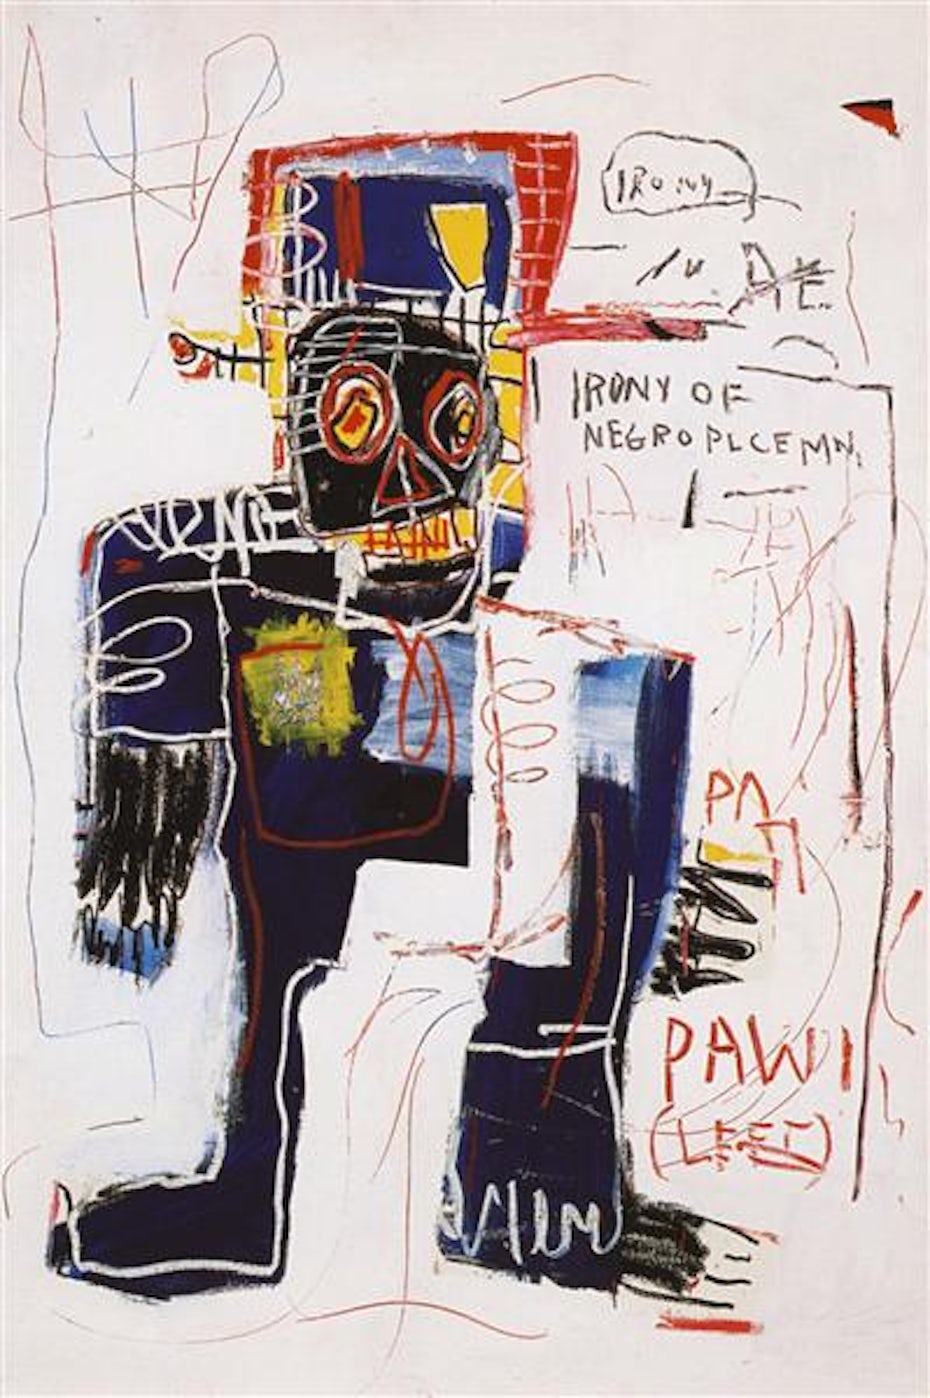 Irony of a Negro Policeman by Basquiat